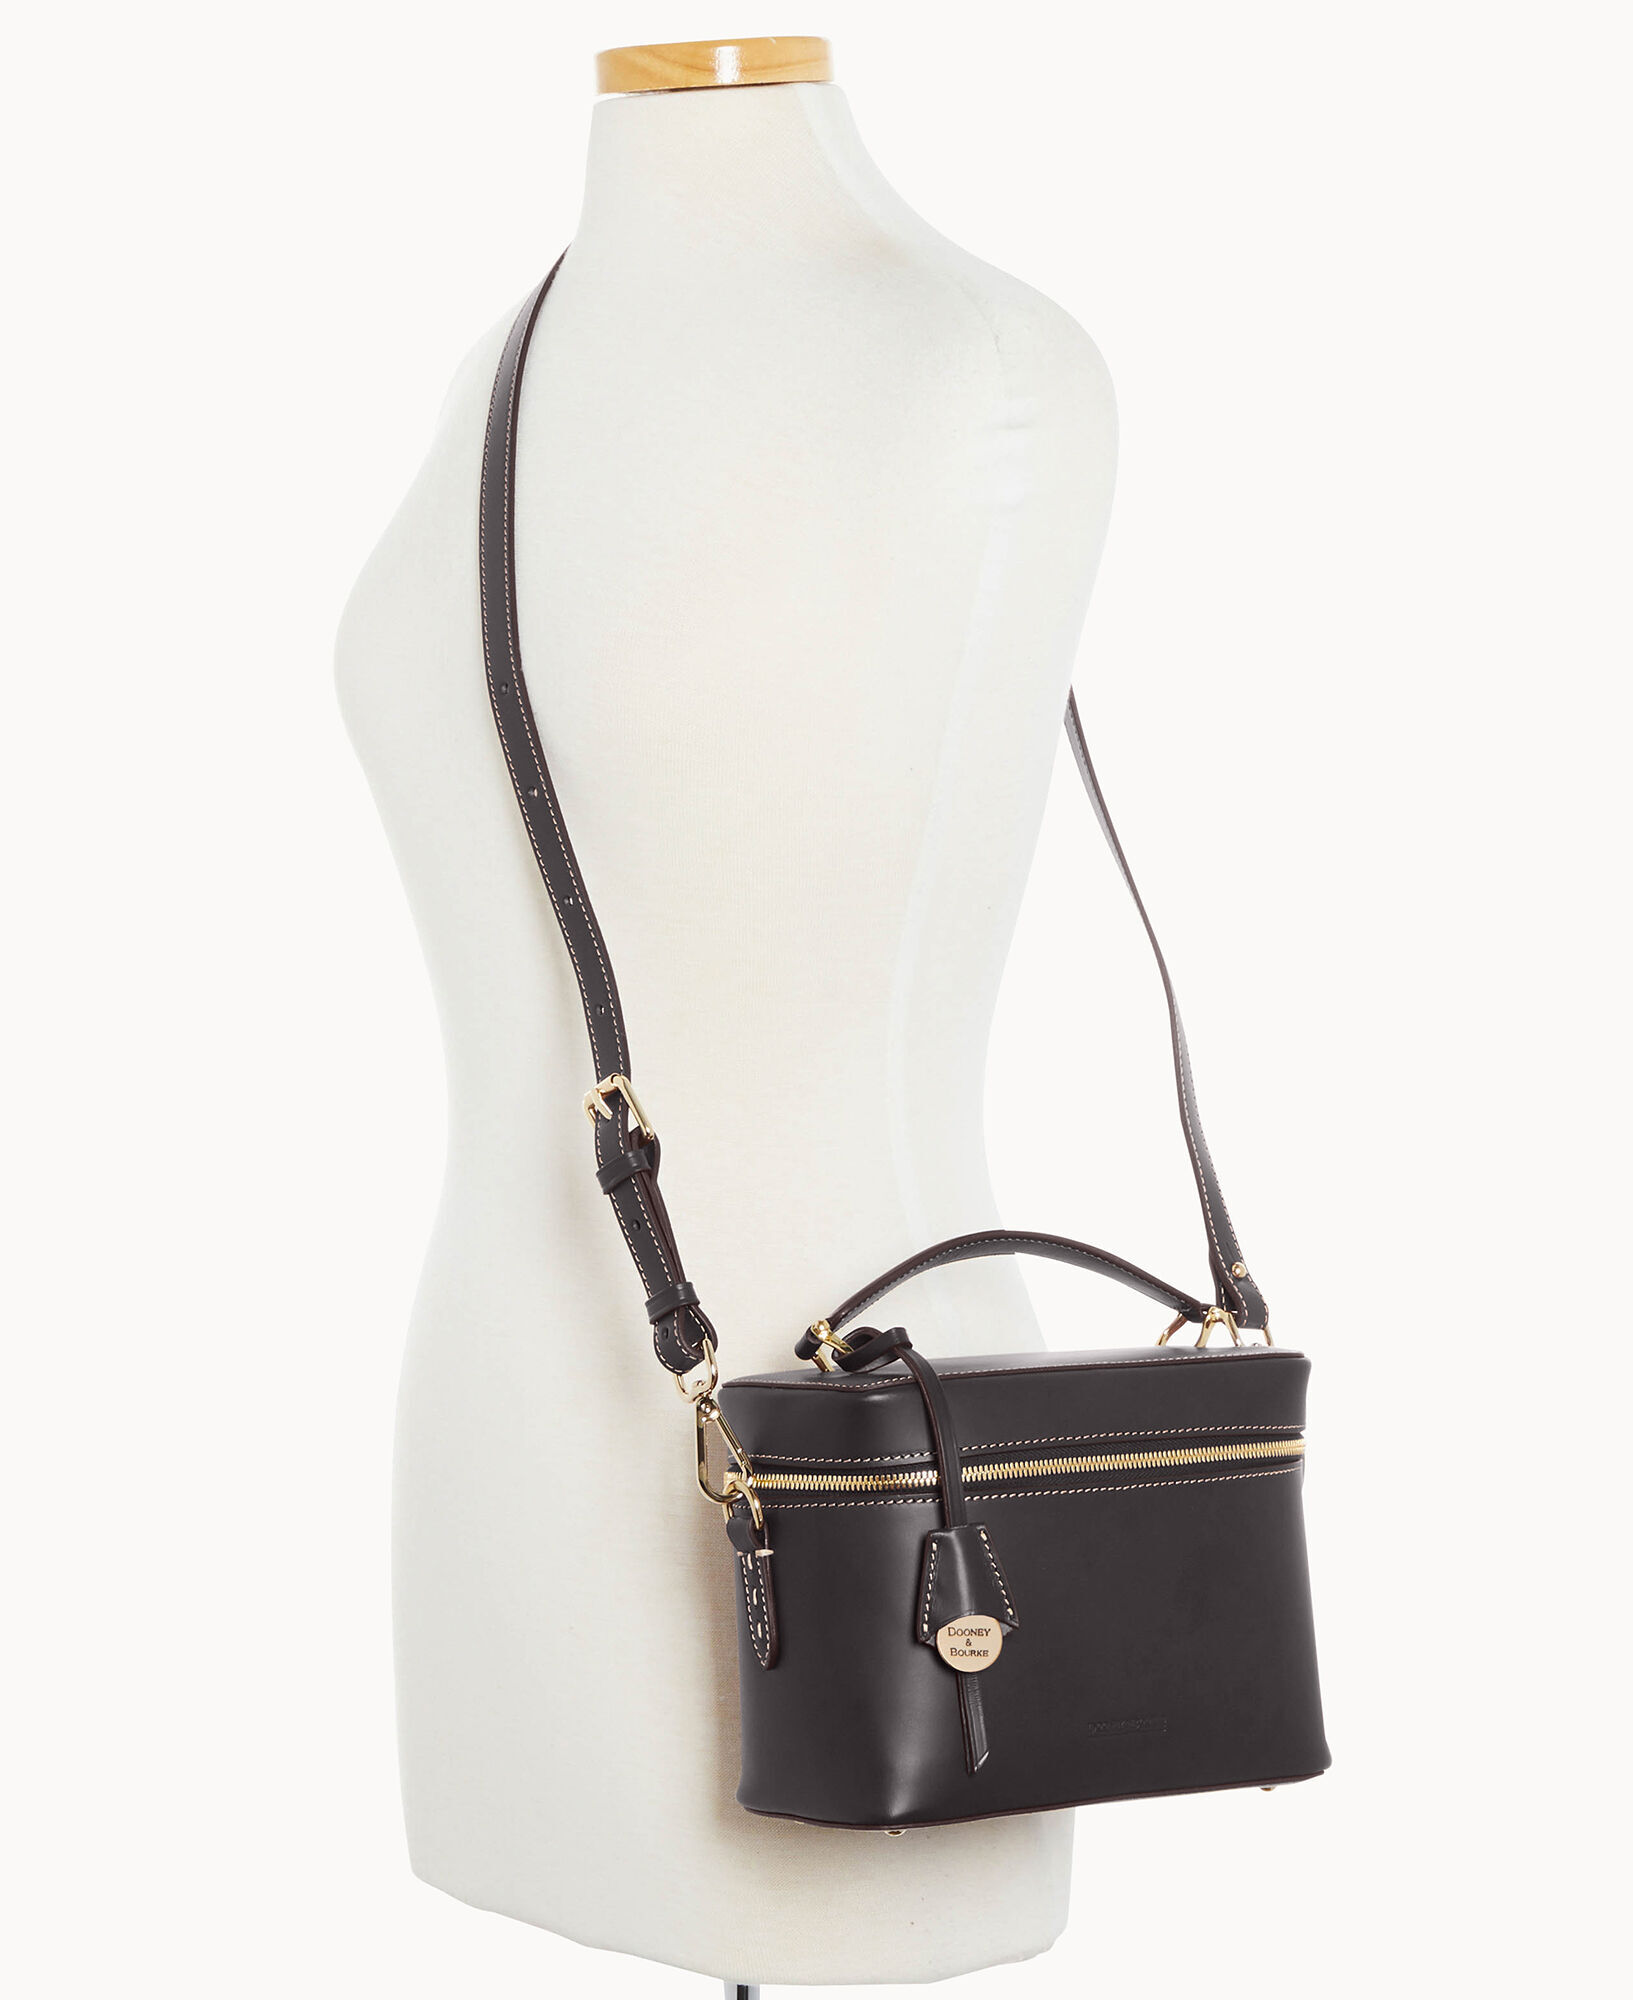 COACH Trail Bag in Black Smooth Leather